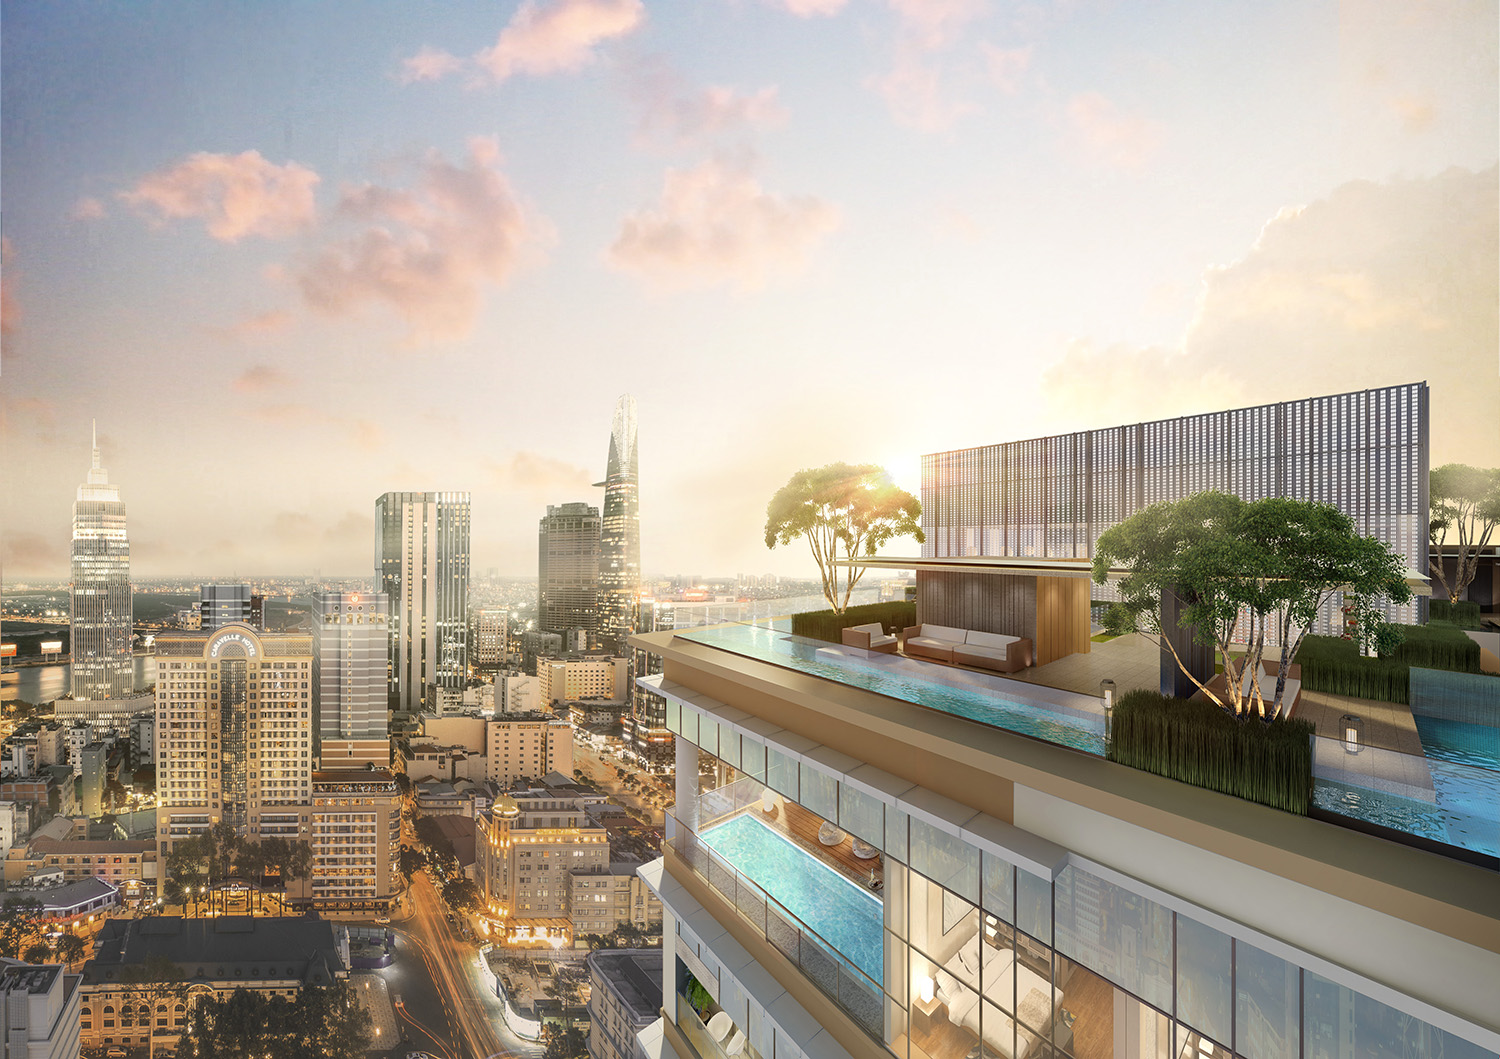 The Marq offering stunning views of Ho Chi Minh city and a true luxury lifestyle for discerning investors.